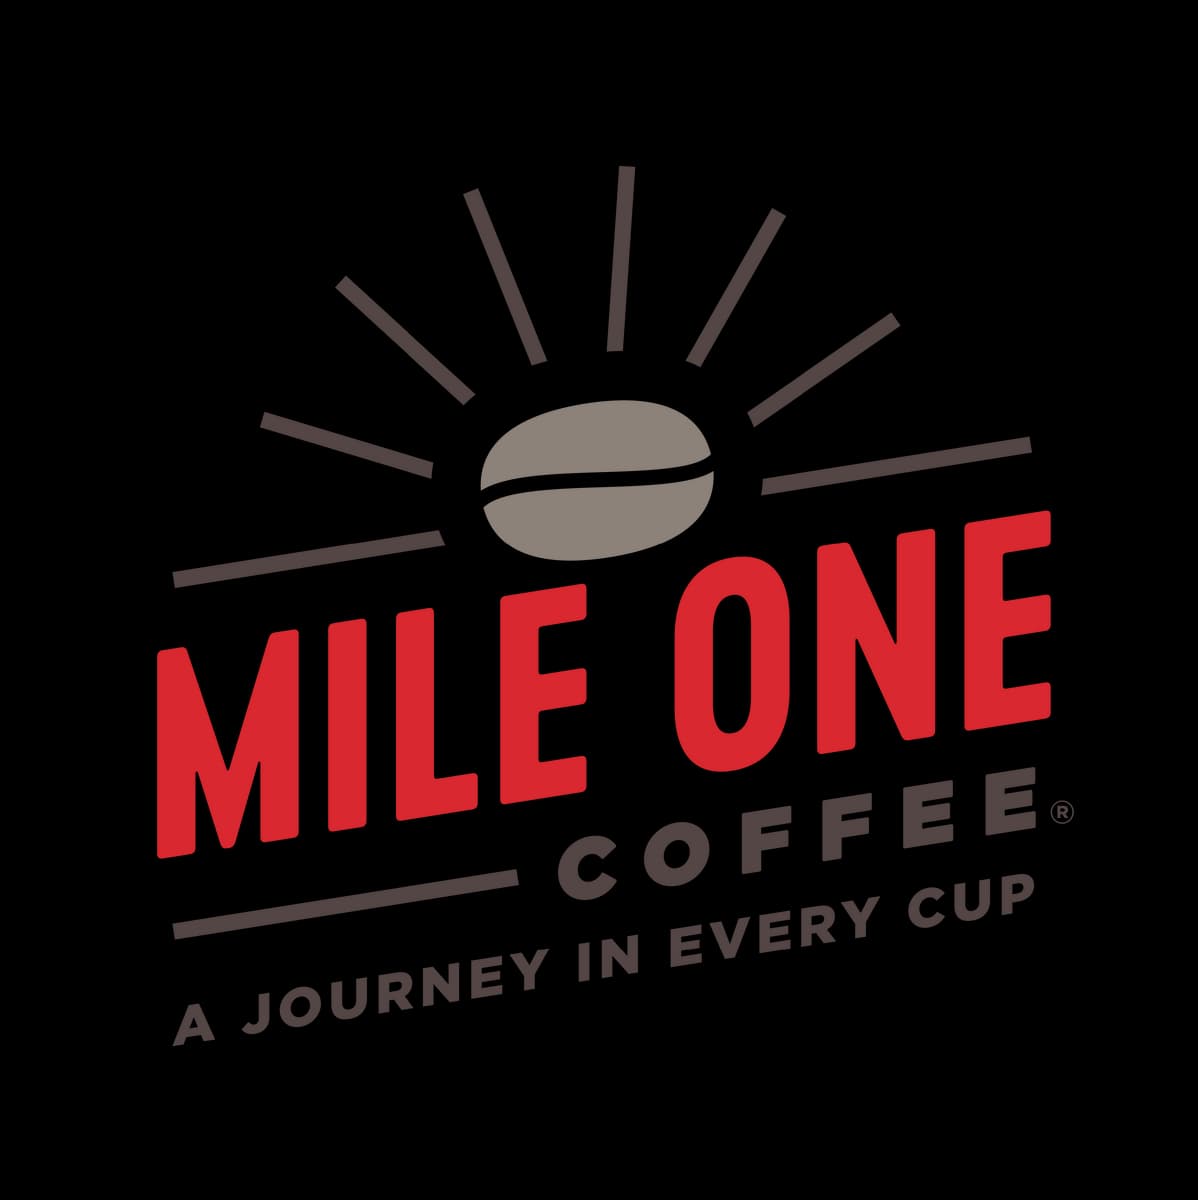 Mile one coffee. A journey in every cup